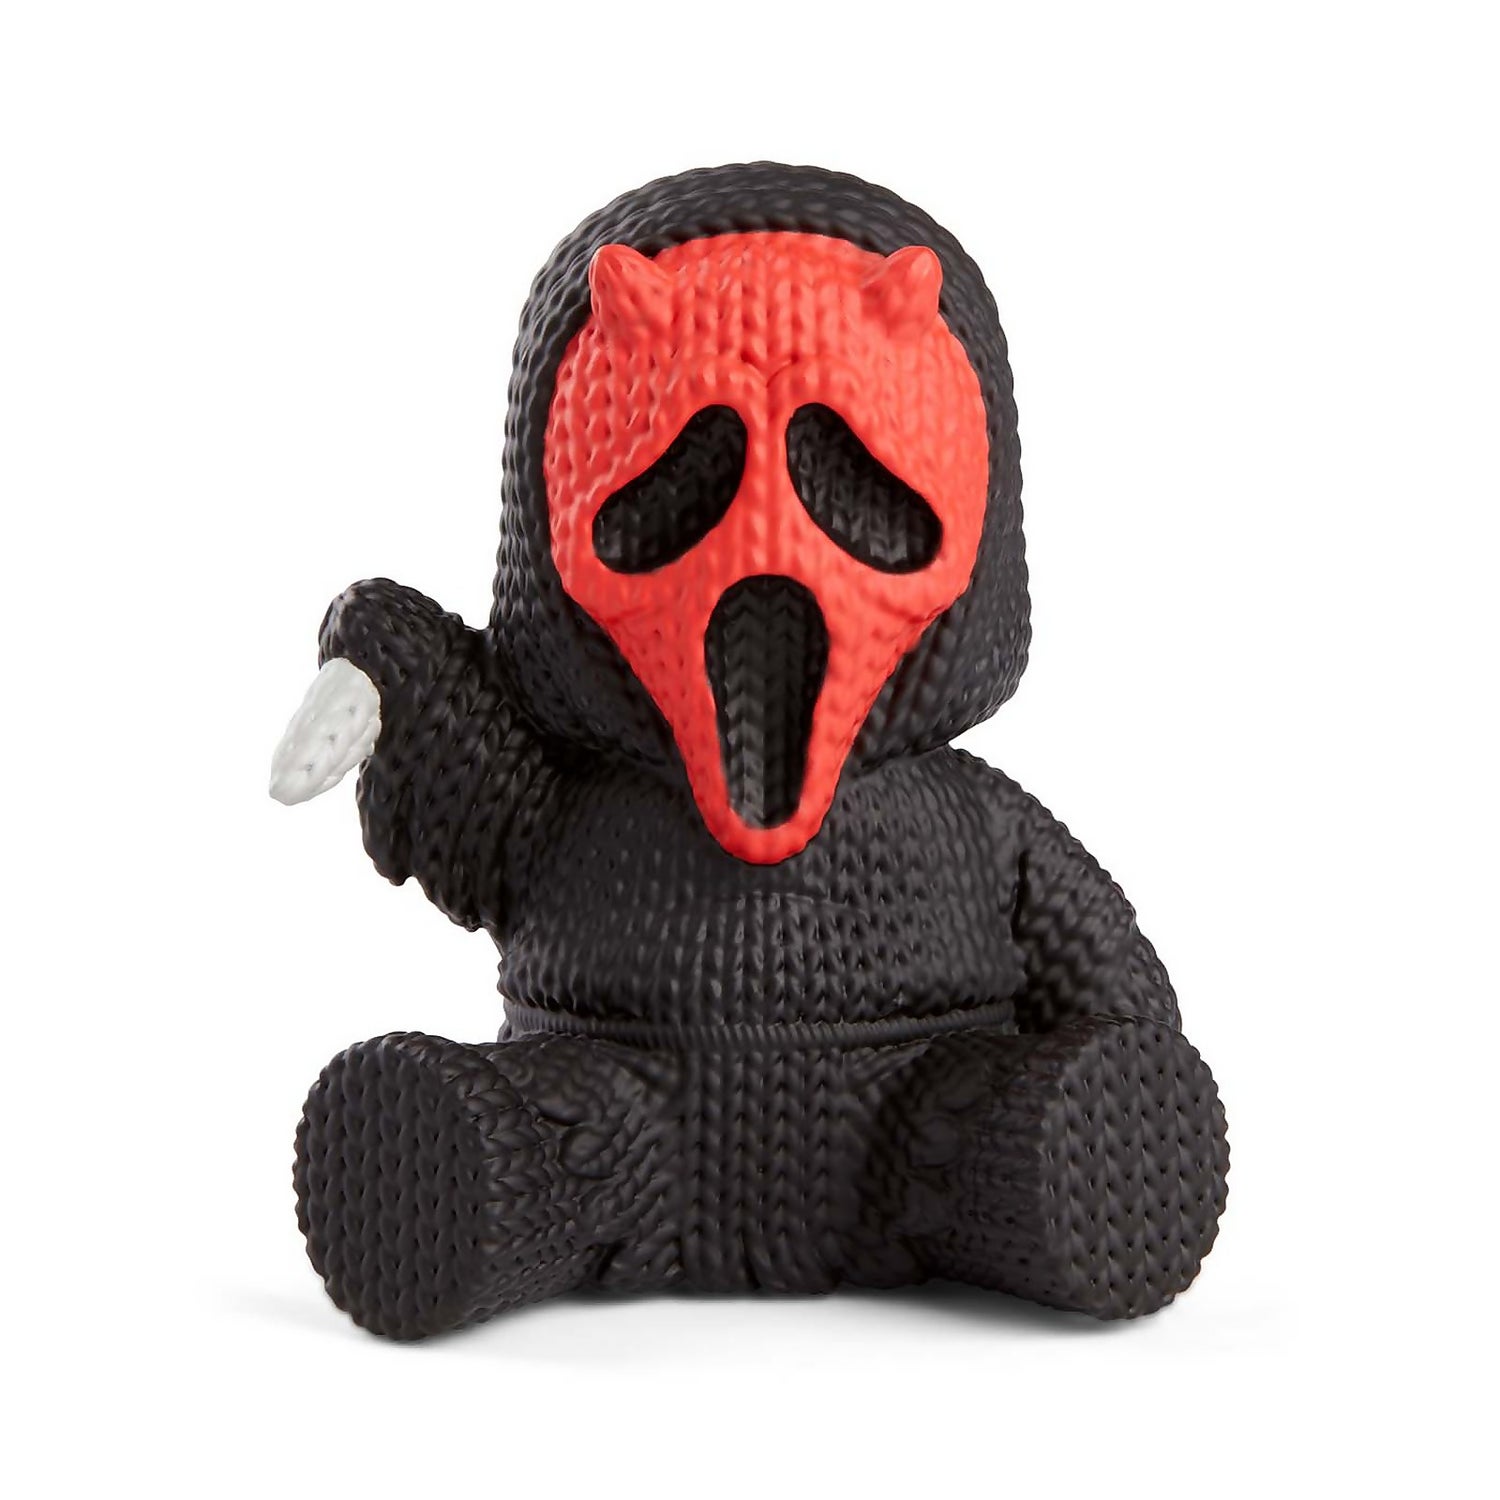 Ghost Face Devil Vinyl Figure from Handmade By Robots